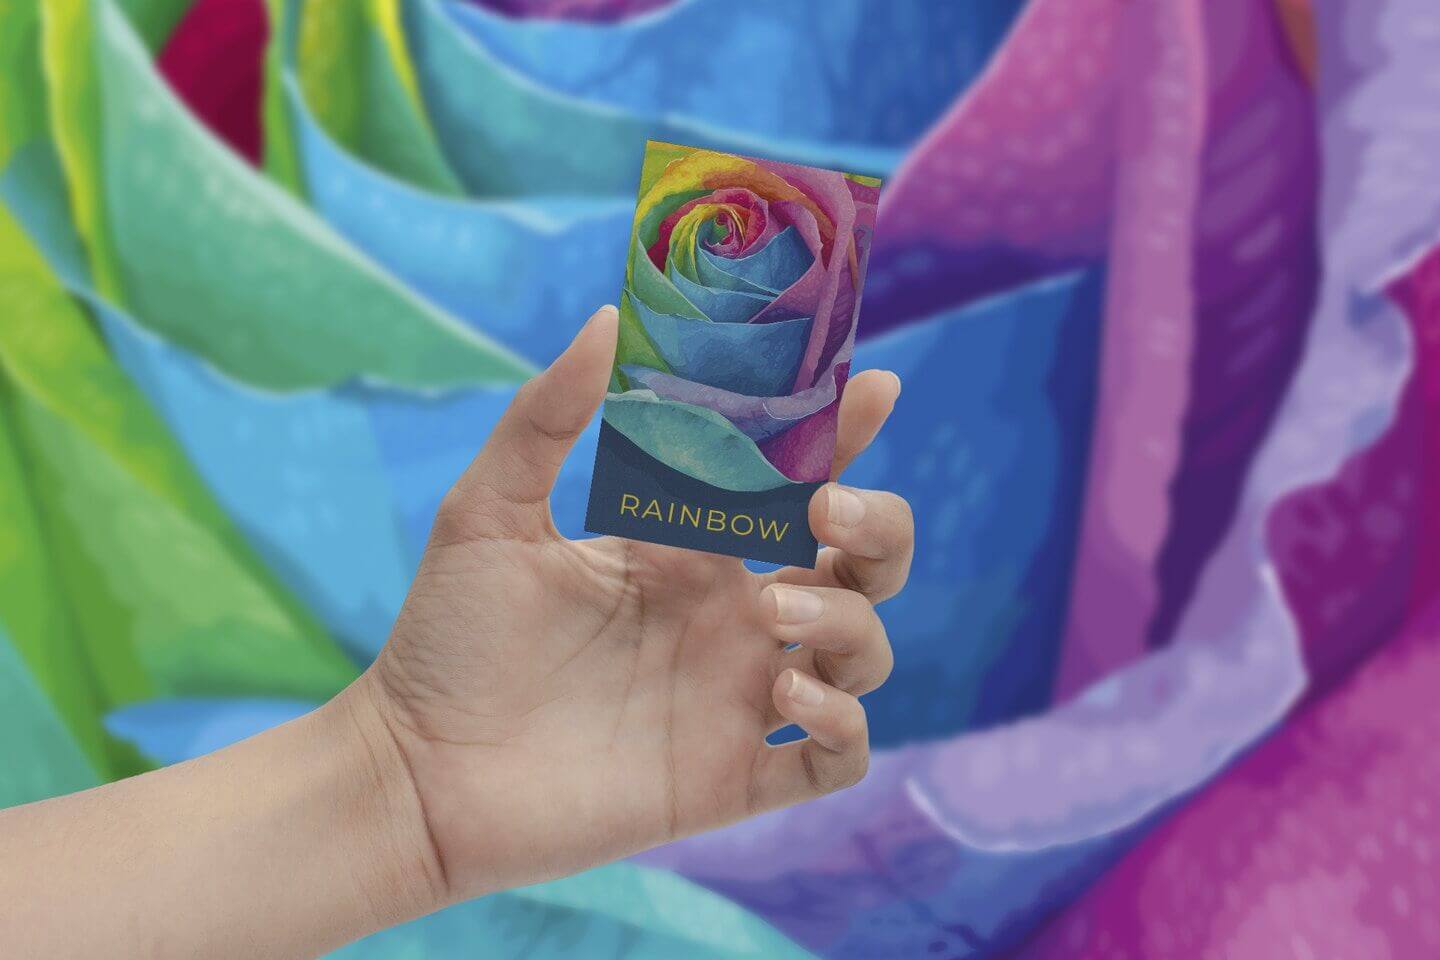 Mockup Showcasing a Hand Holding a Business Card